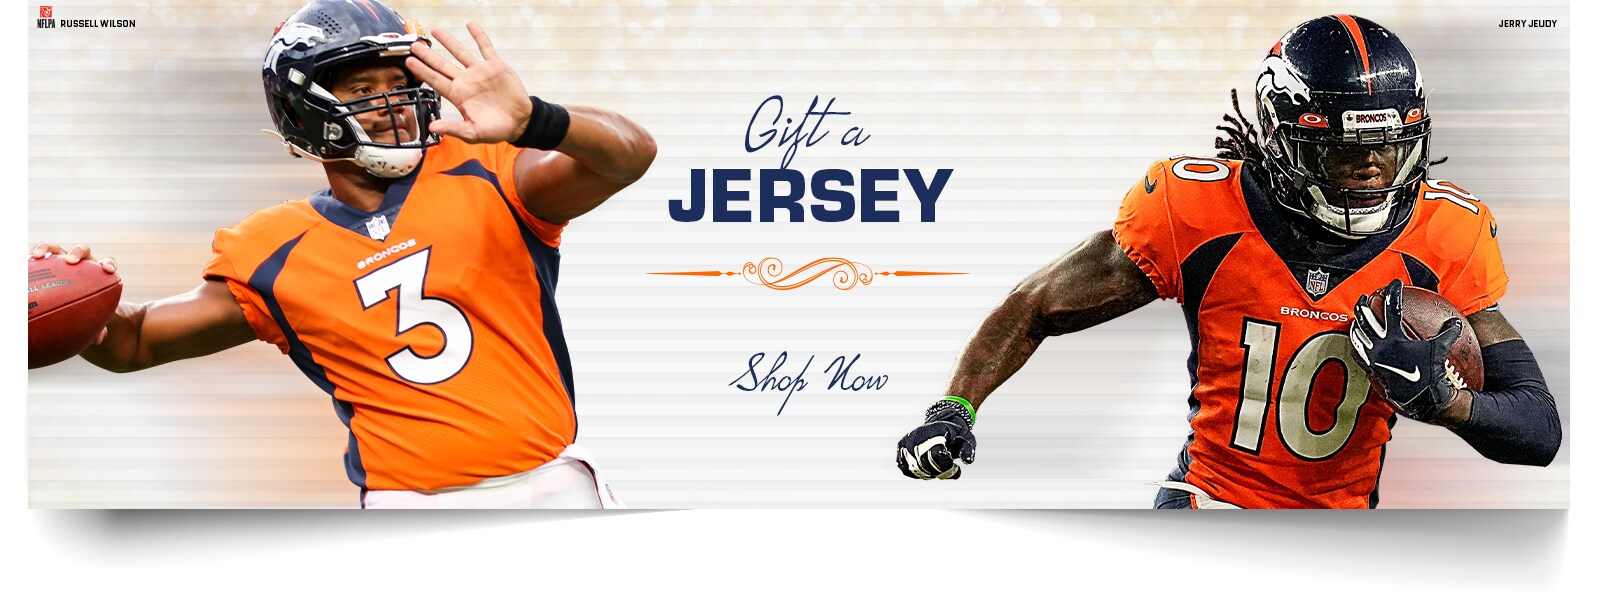 GIFT A JERSEY. SHOP NOW